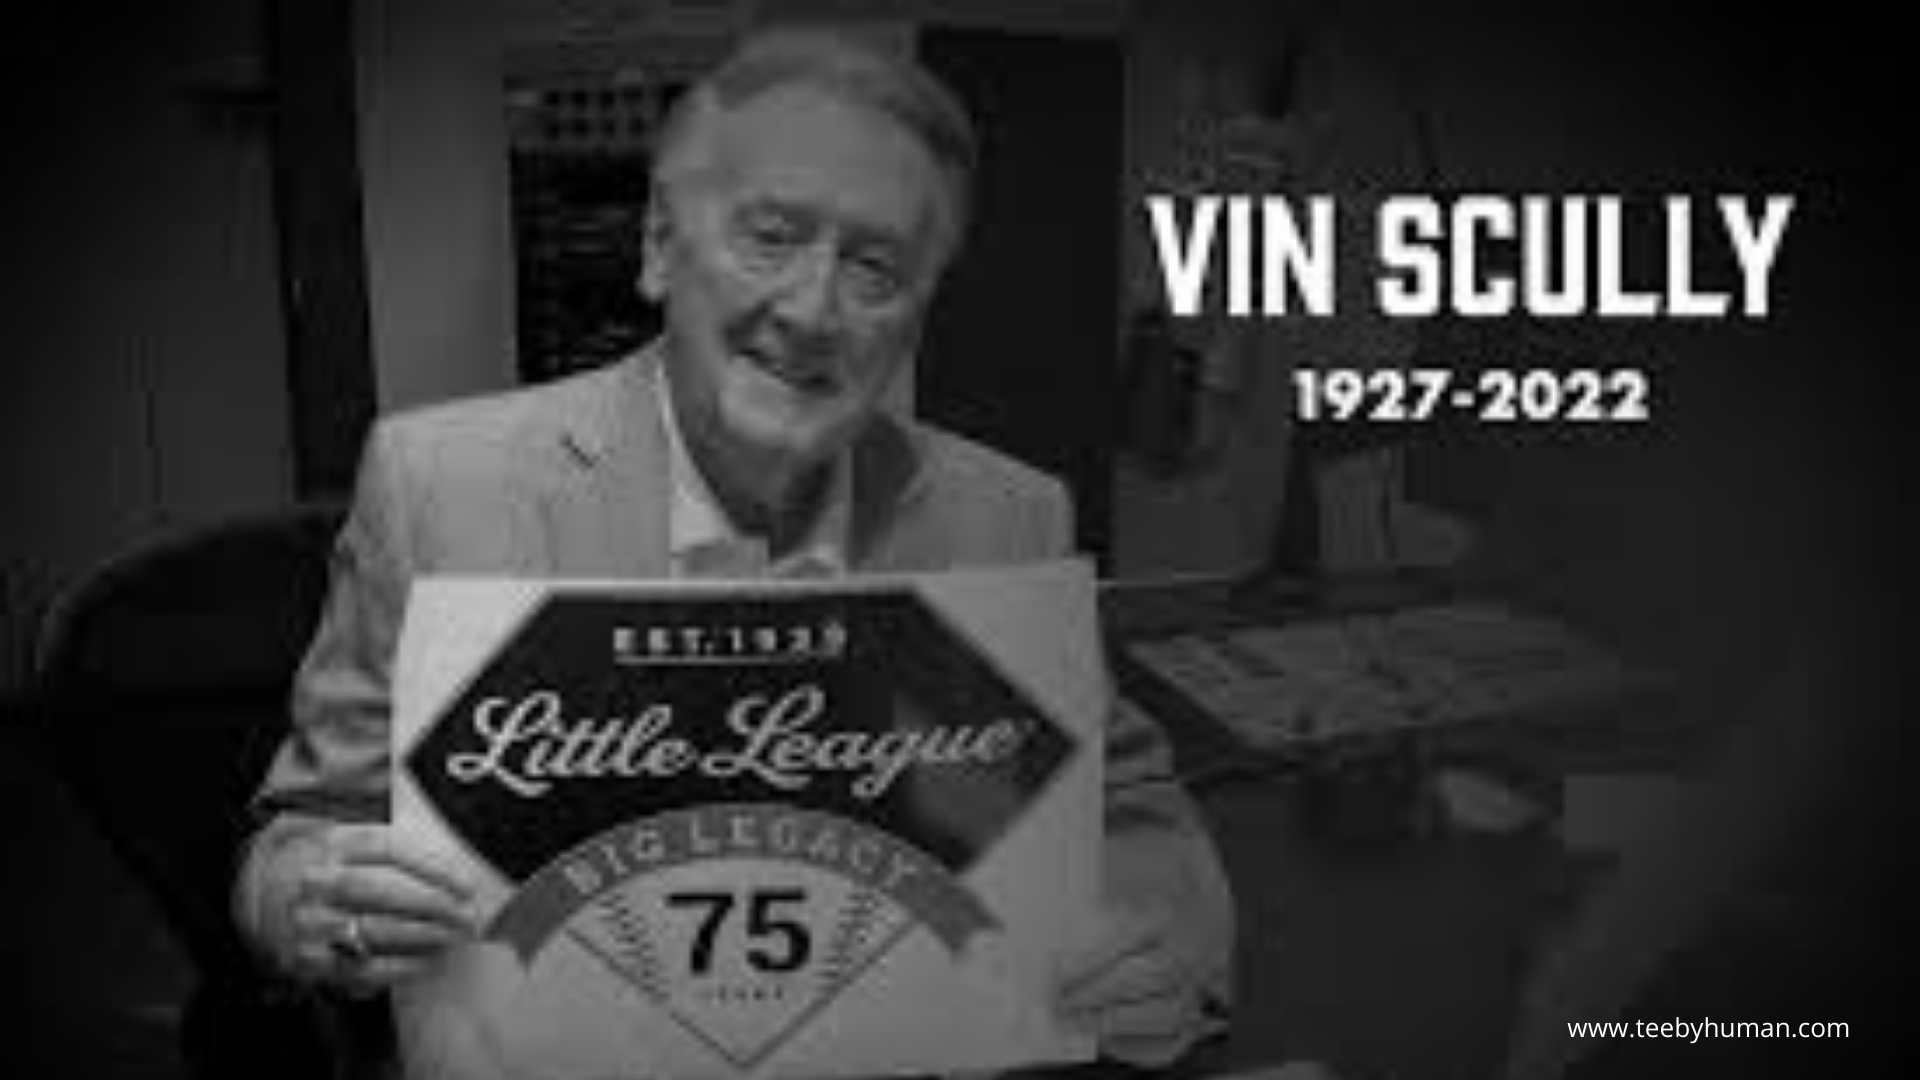 Commemorating Vin Scully an American sportscaster By These Items